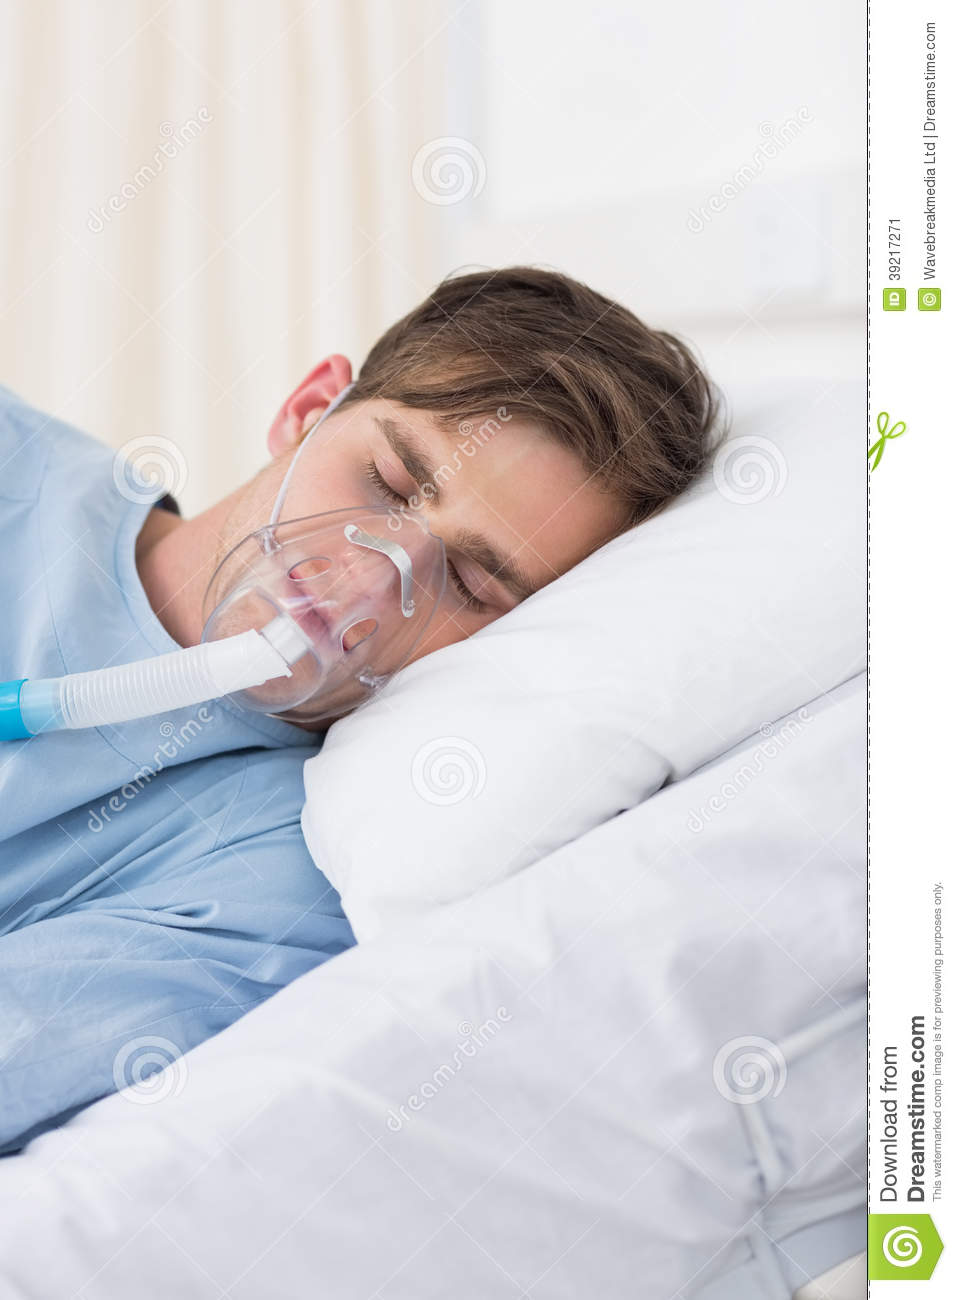 Patient Wearing Oxygen Mask In Hospital Stock Photo   Image  39217271